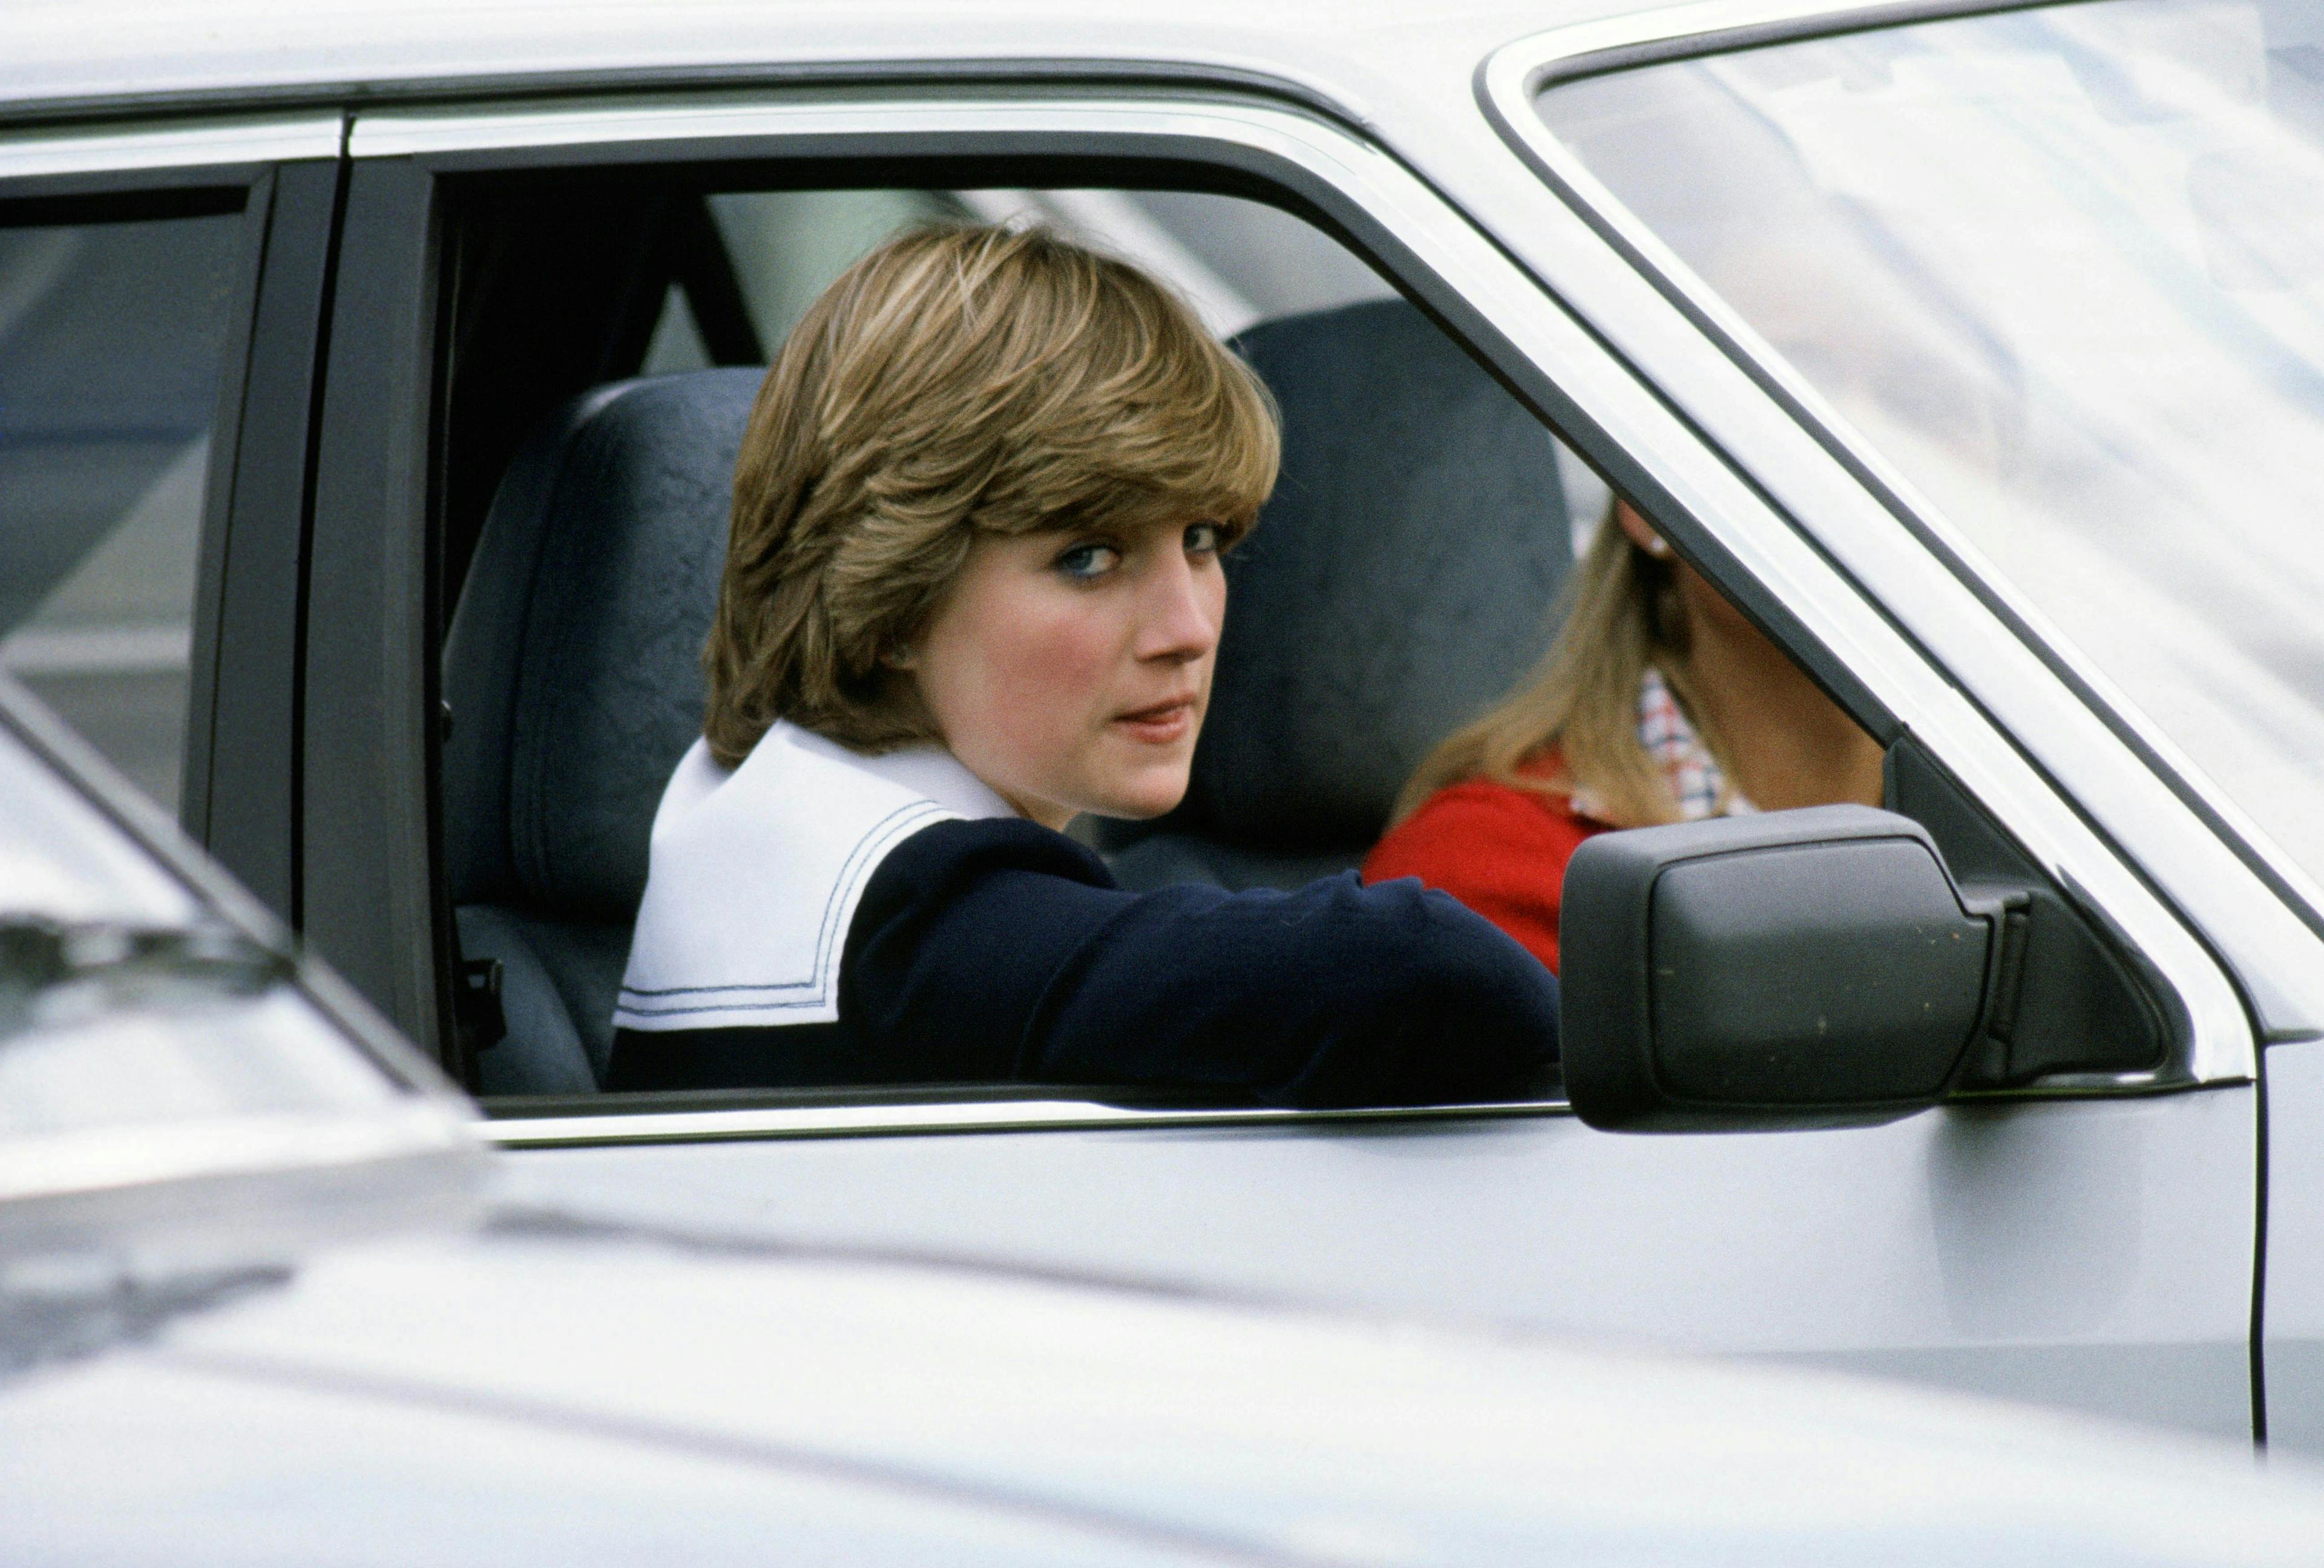 angry british royal family diana princess of wales driving equestrian events equestrian sports eye contact half length half-lengths off duty polo private cars recreation royal transportation royals royalty serious person human car transportation vehicle automobile cushion mirror car mirror